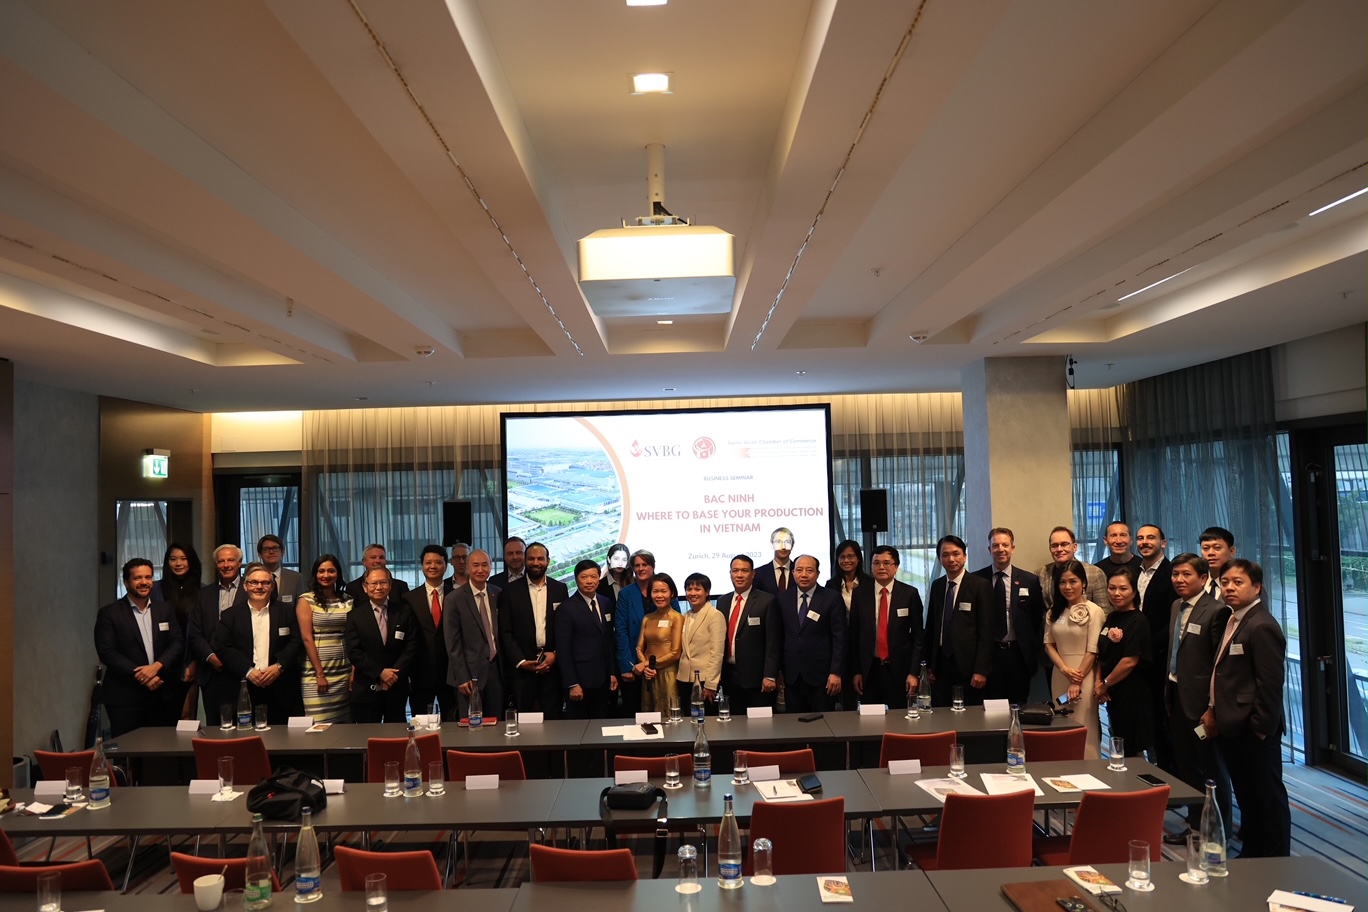 The business seminar "Bac Ninh – Where to base your production in Vietnam” held in Zurich, Switzerland